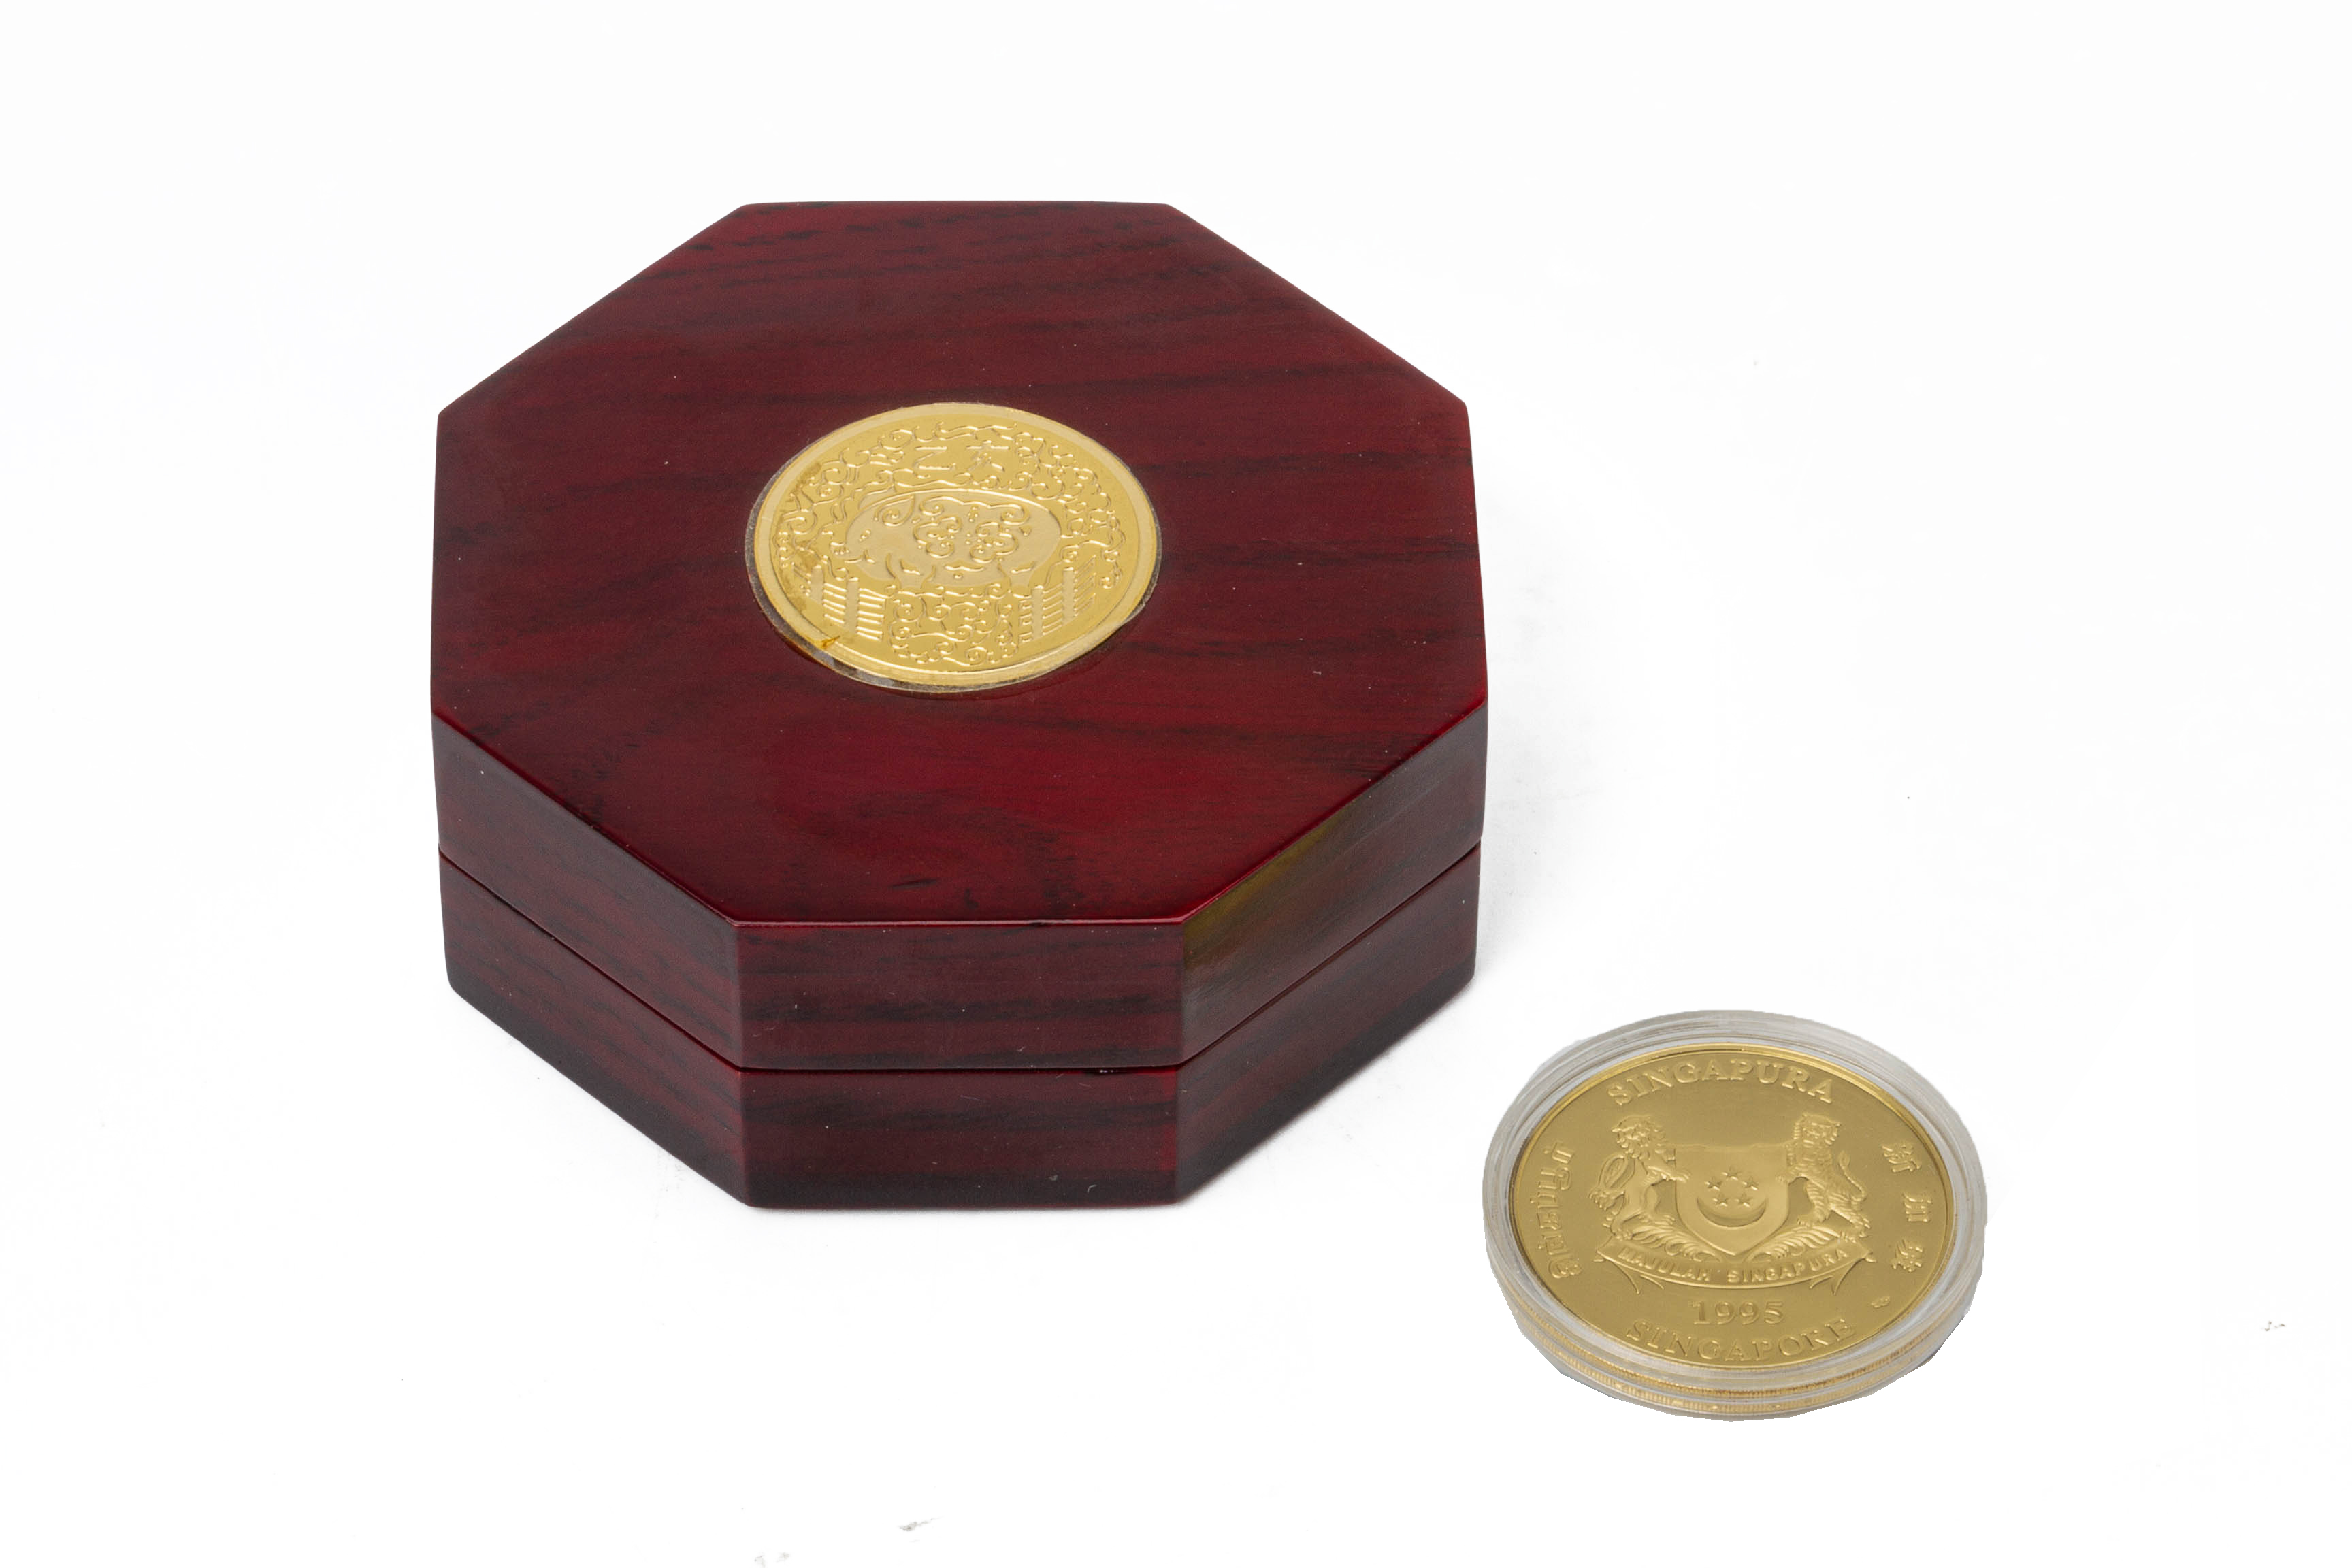 A SINGAPORE $250 GOLD PROOF COIN, 1995 - YEAR OF THE PIG